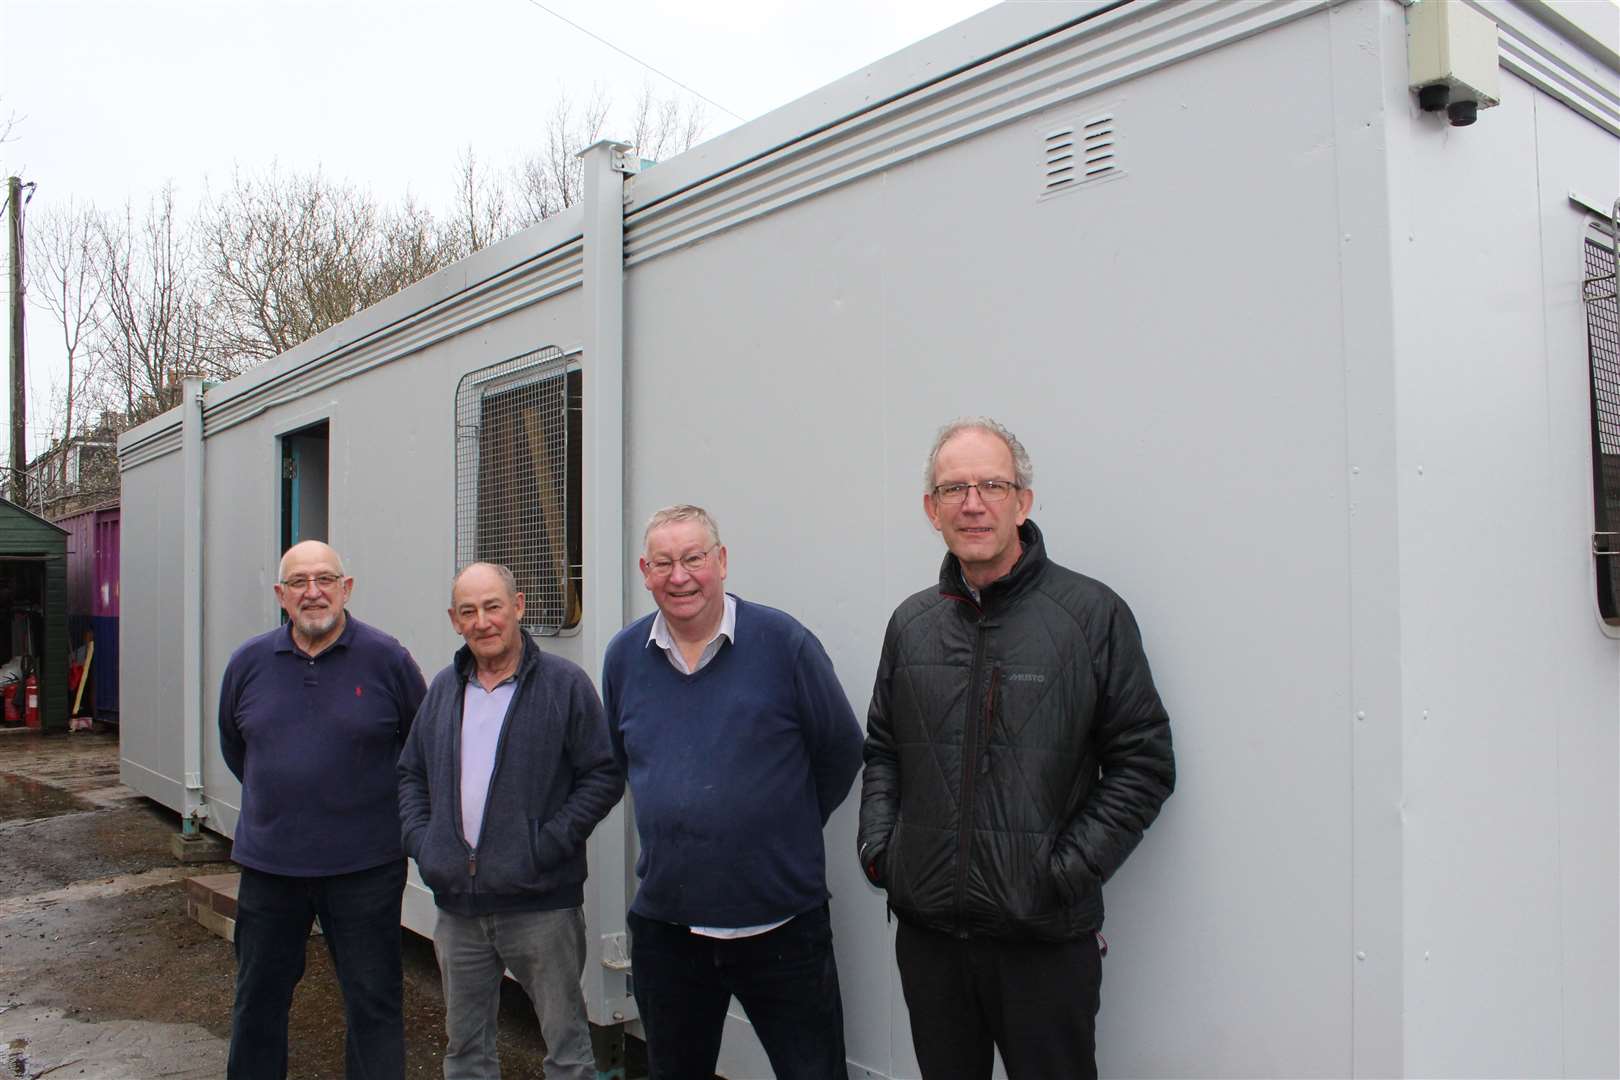 Members of Ellon and District Men's Shed outside the new portable building.